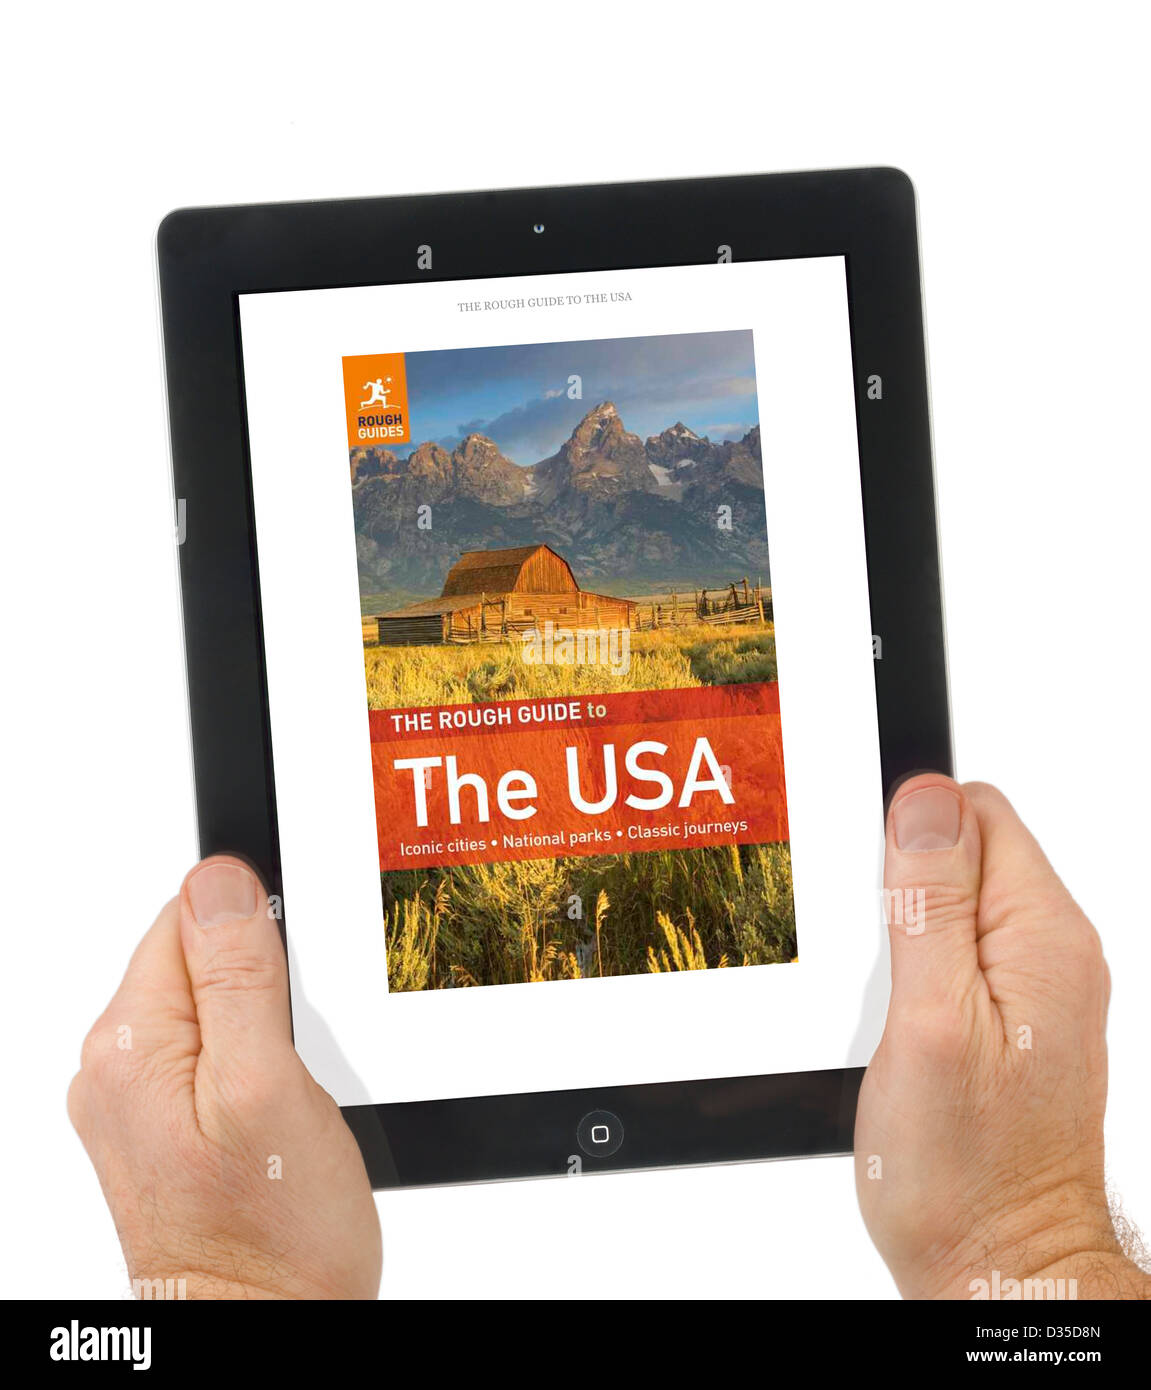 Reading a Rough Guide travel book with the Kindle app on an Apple iPad 4th genration retina display tablet computer Stock Photo